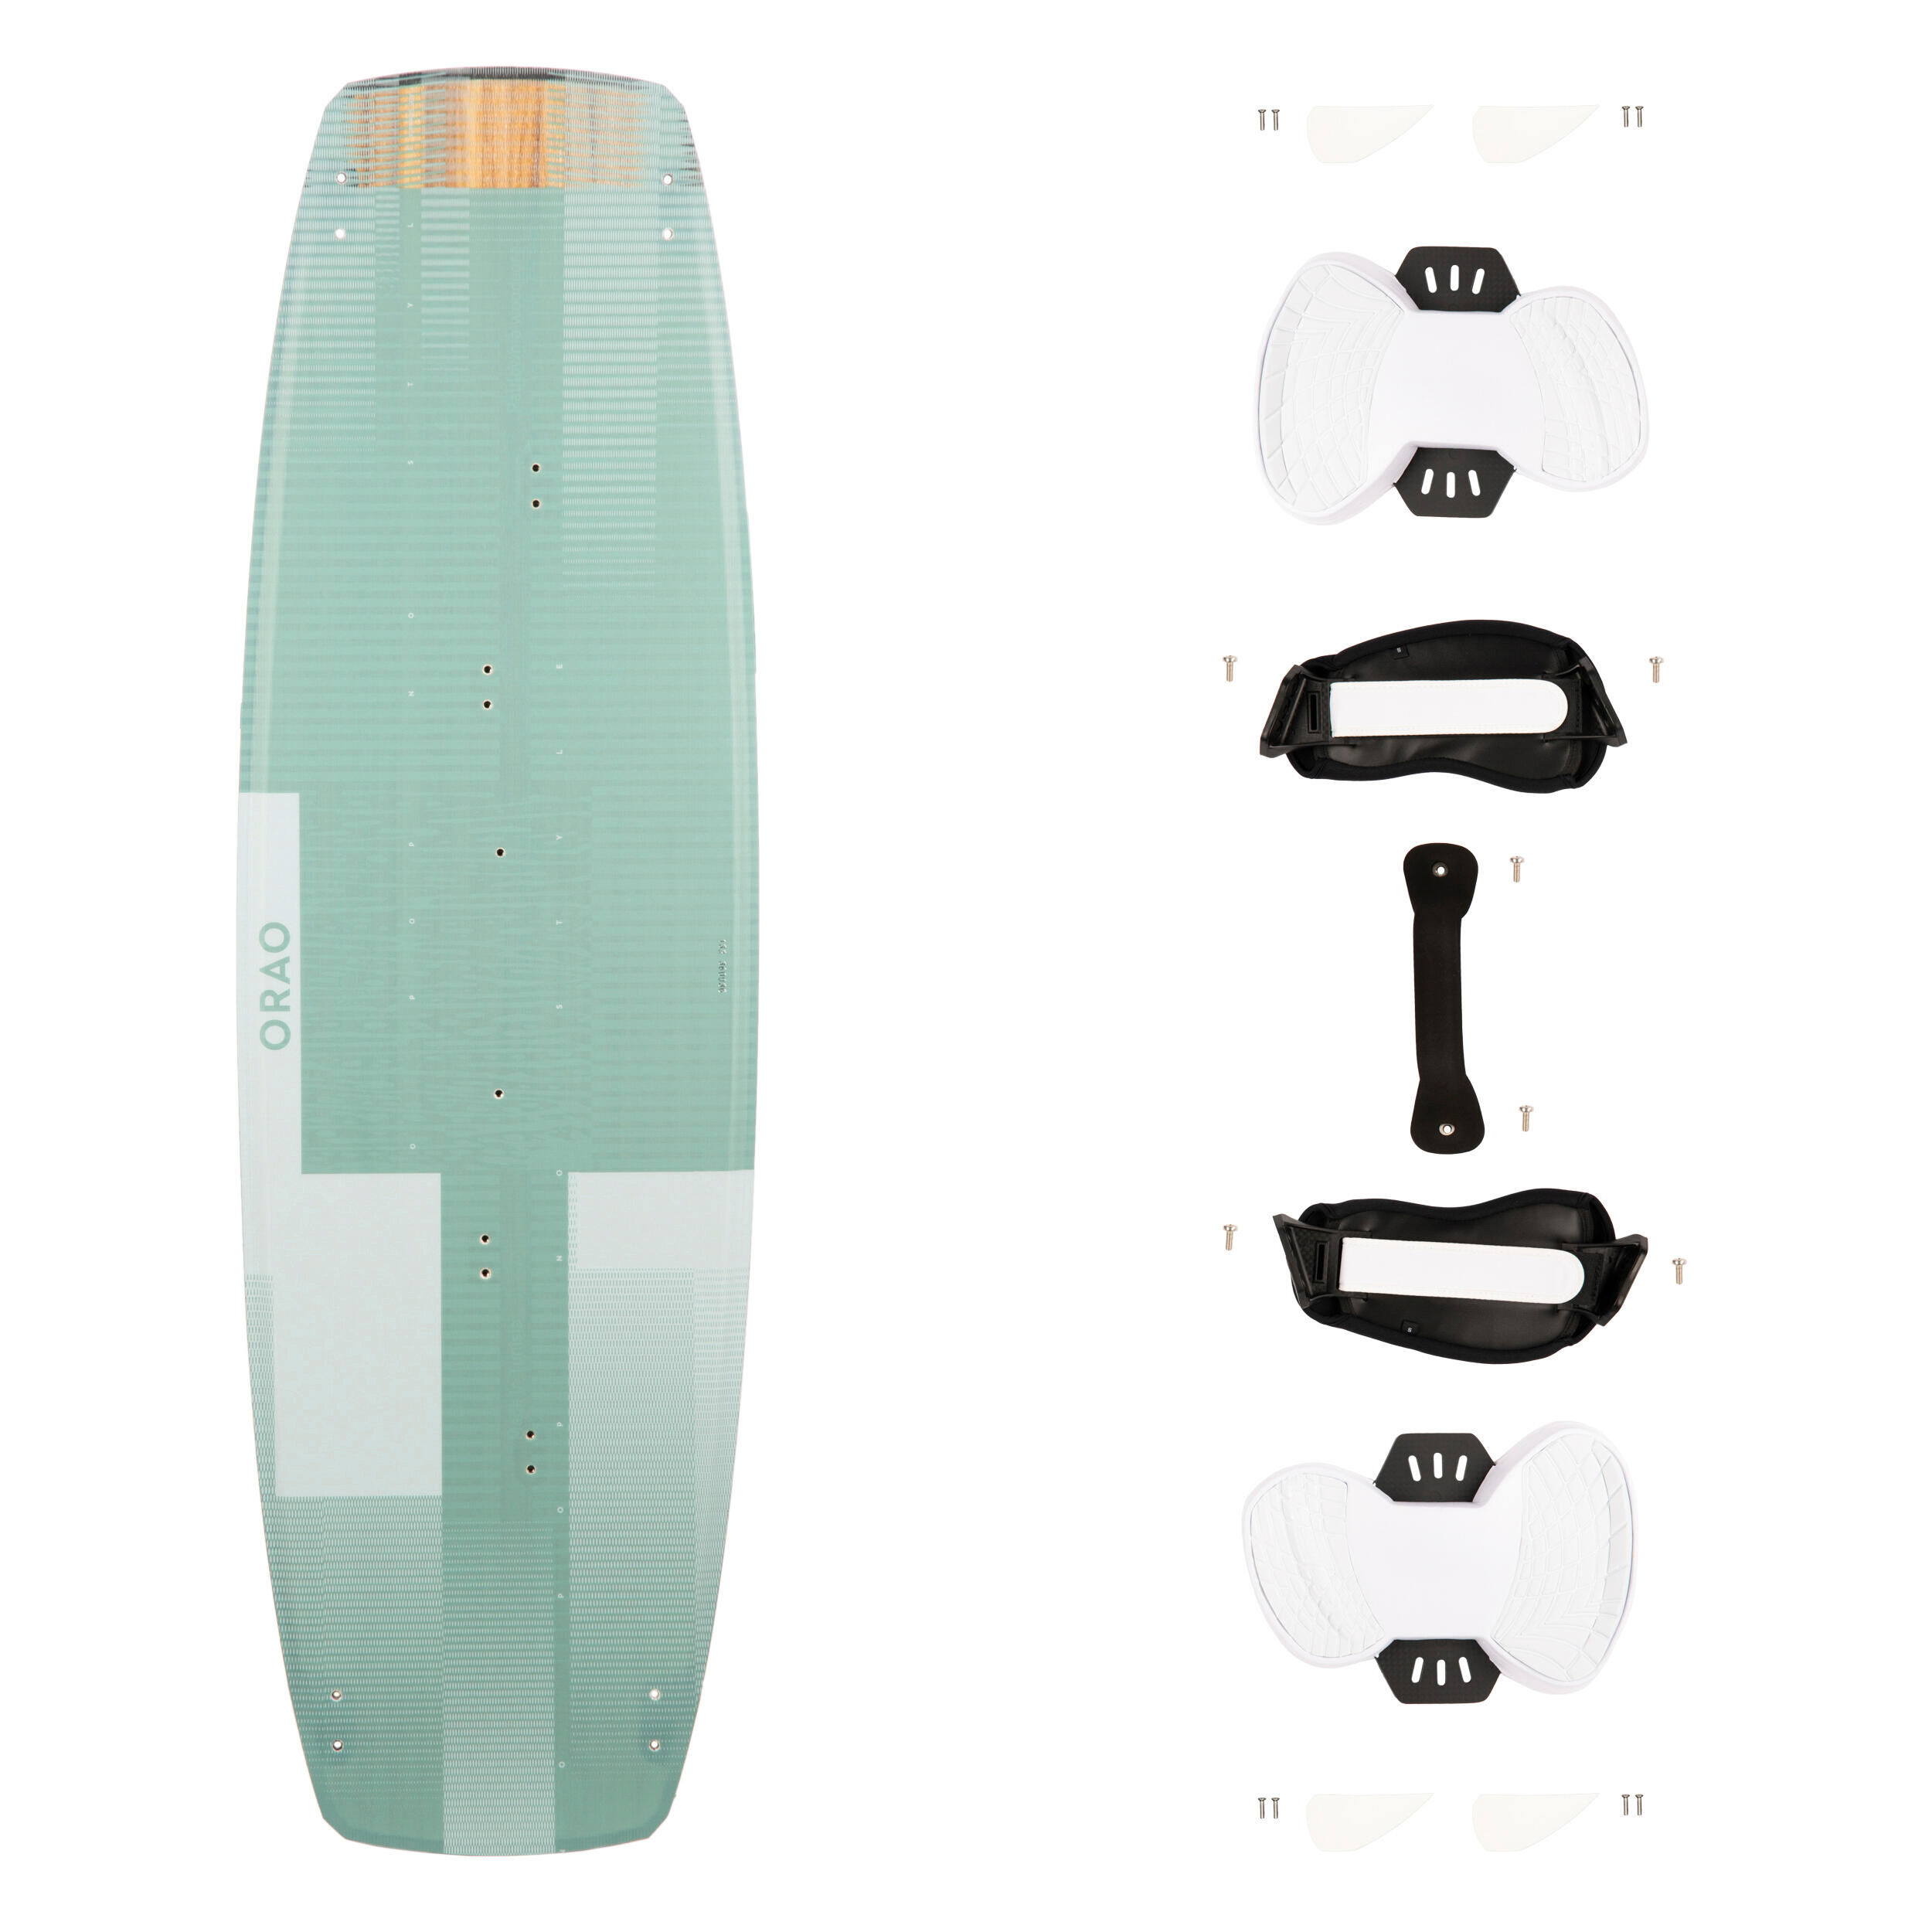 ORAO Twintip carbon kitesurf board 132 x 39 cm (pads and straps included) - TT500